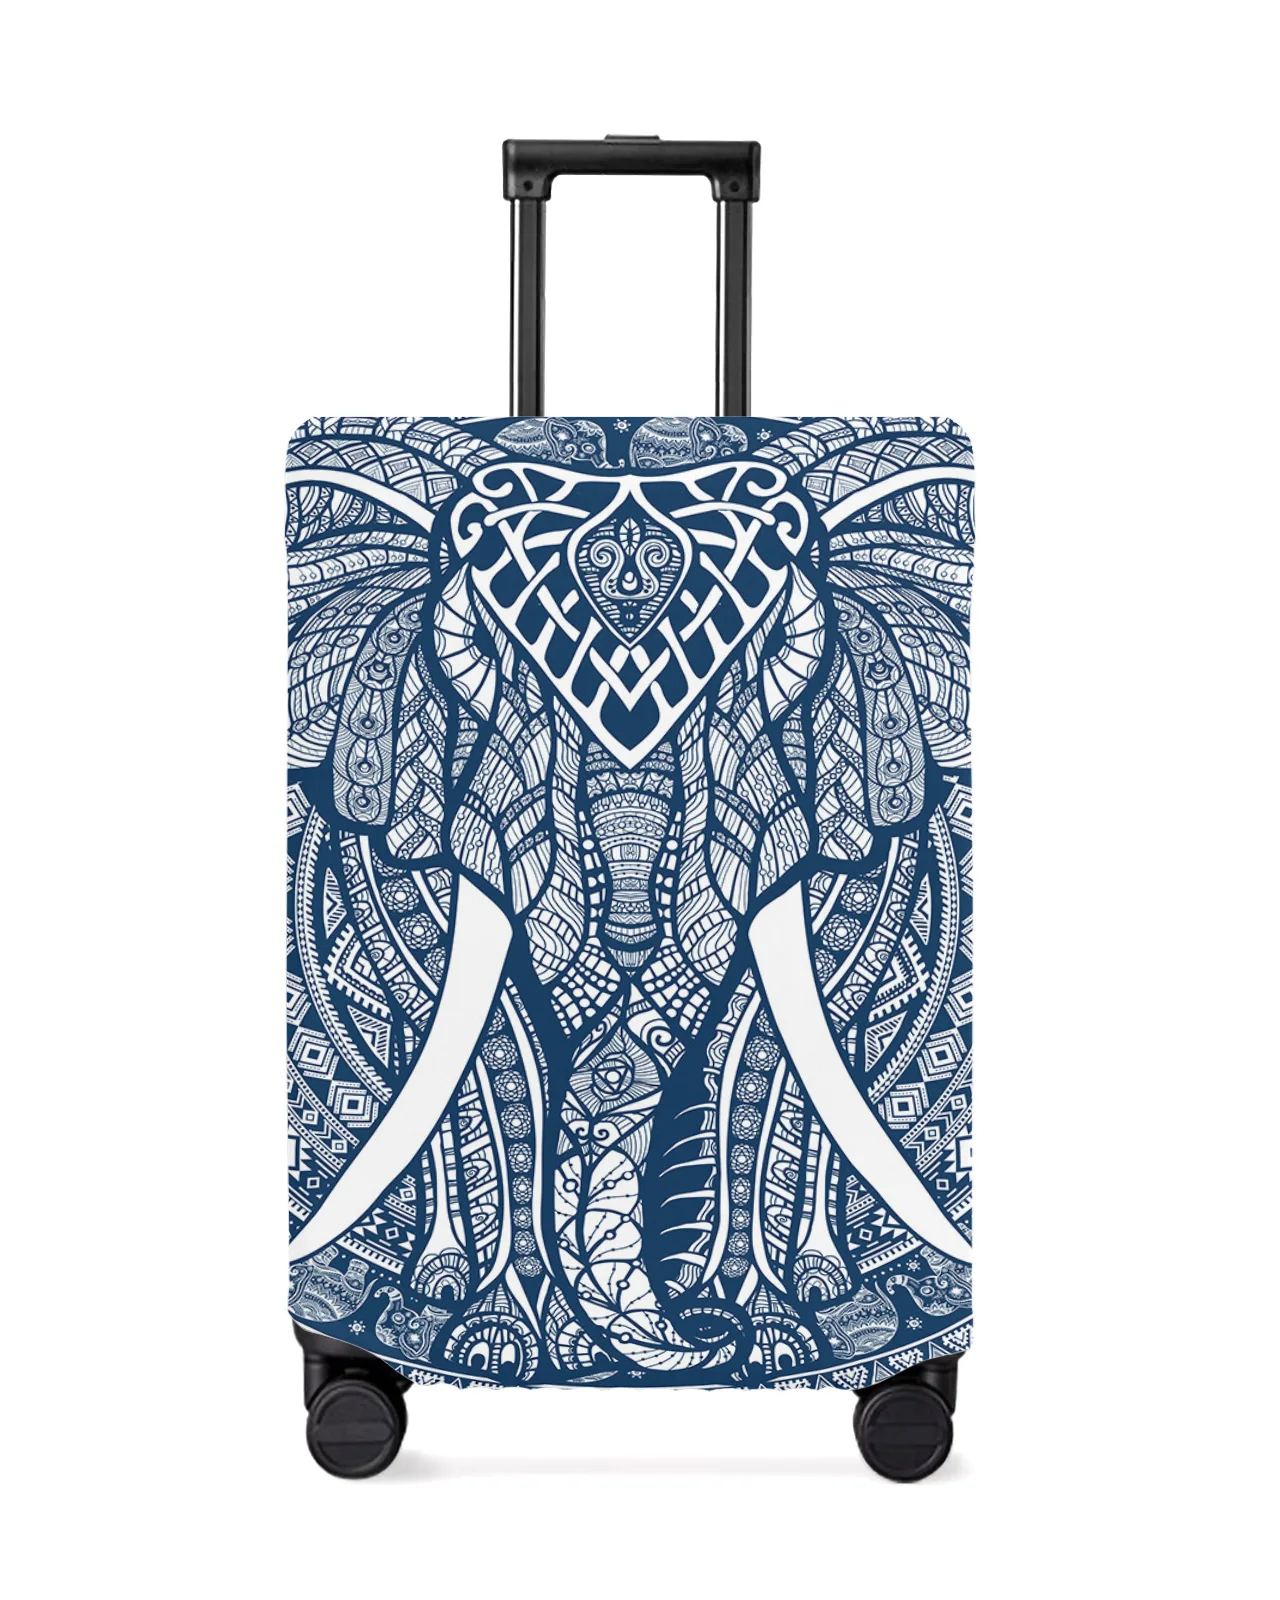 mandala-pattern-elephant-blue-travel-luggage-cover-elastic-baggage-cover-suitcase-case-dust-cover-travel-accessories